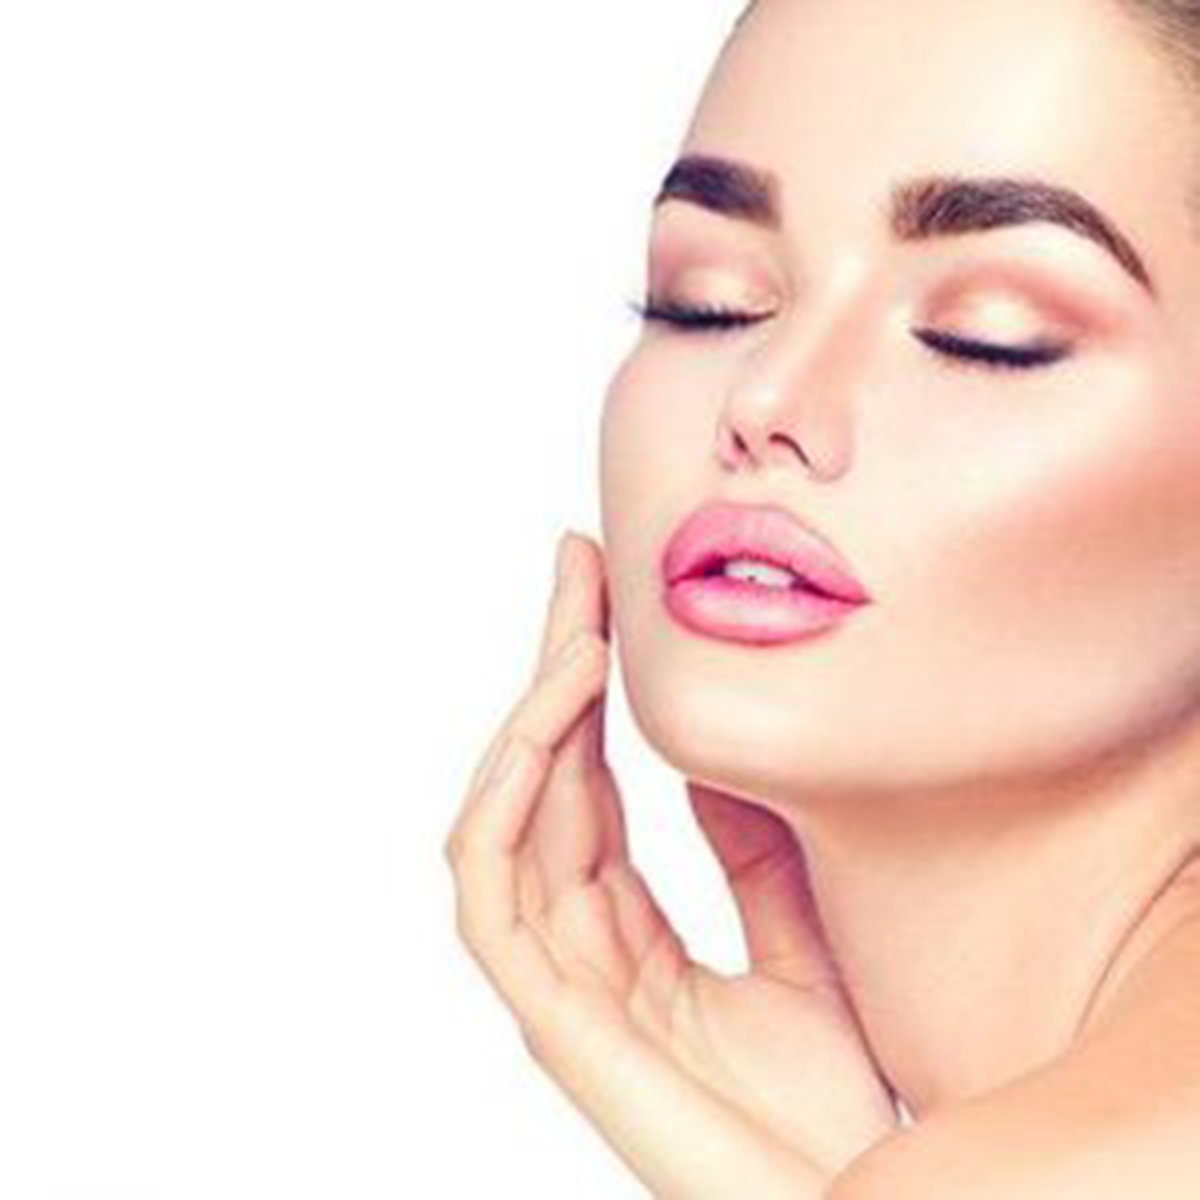 Skin tightening with Ultherapy